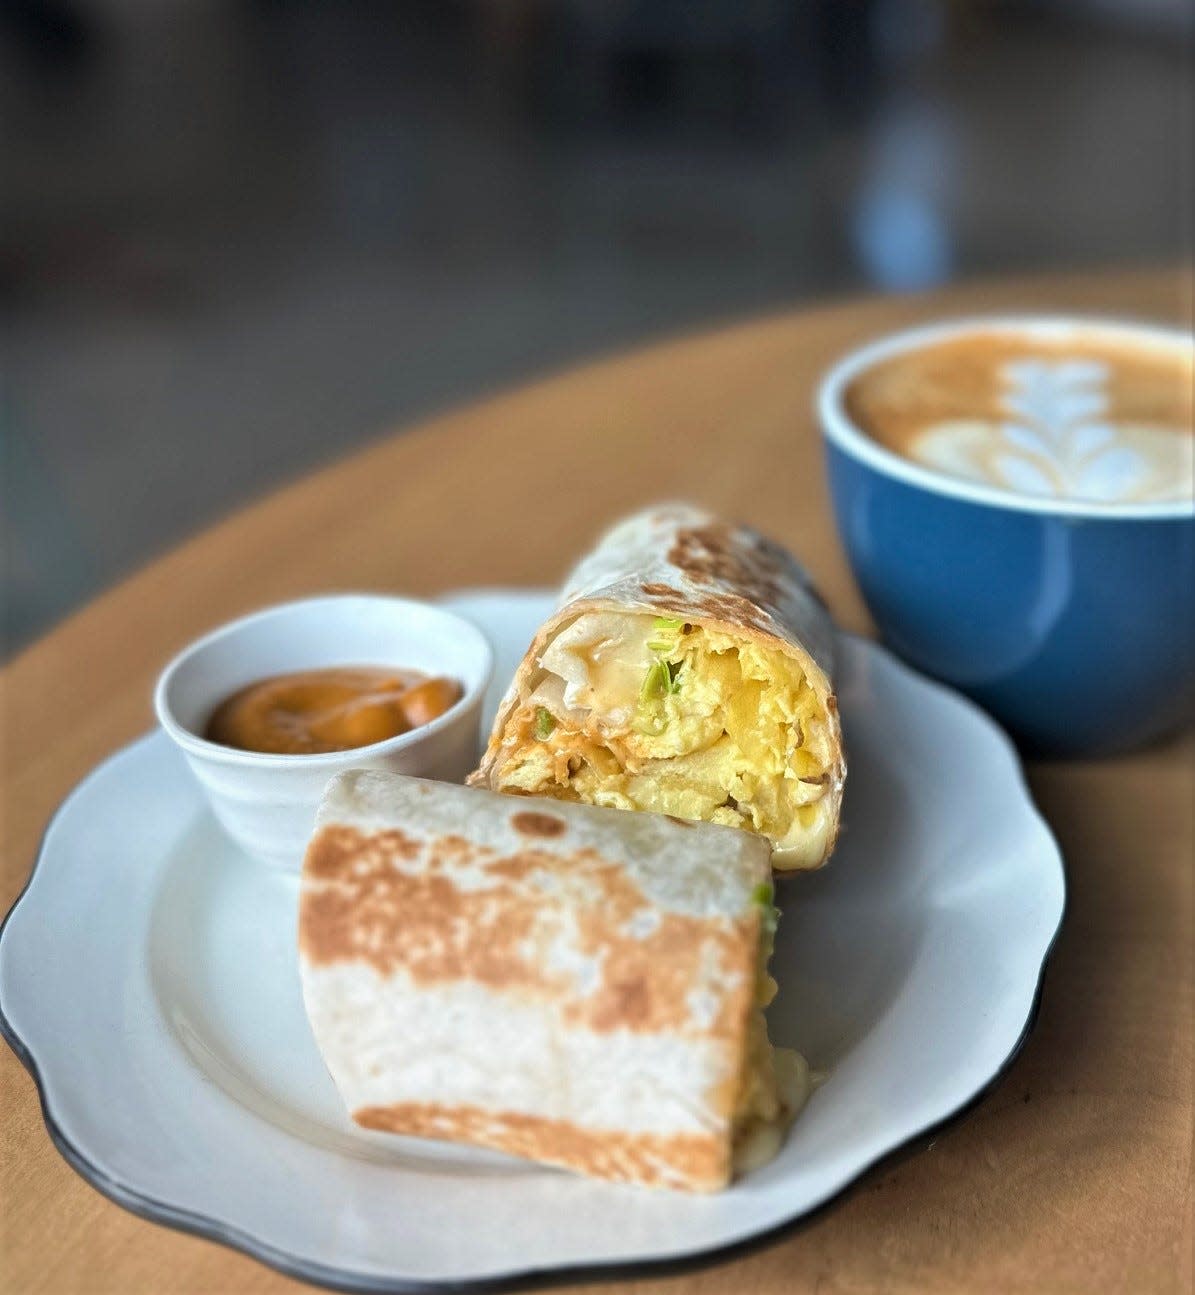 The breakfast burrito at Golden Hour is worthy of a trip all on its own.